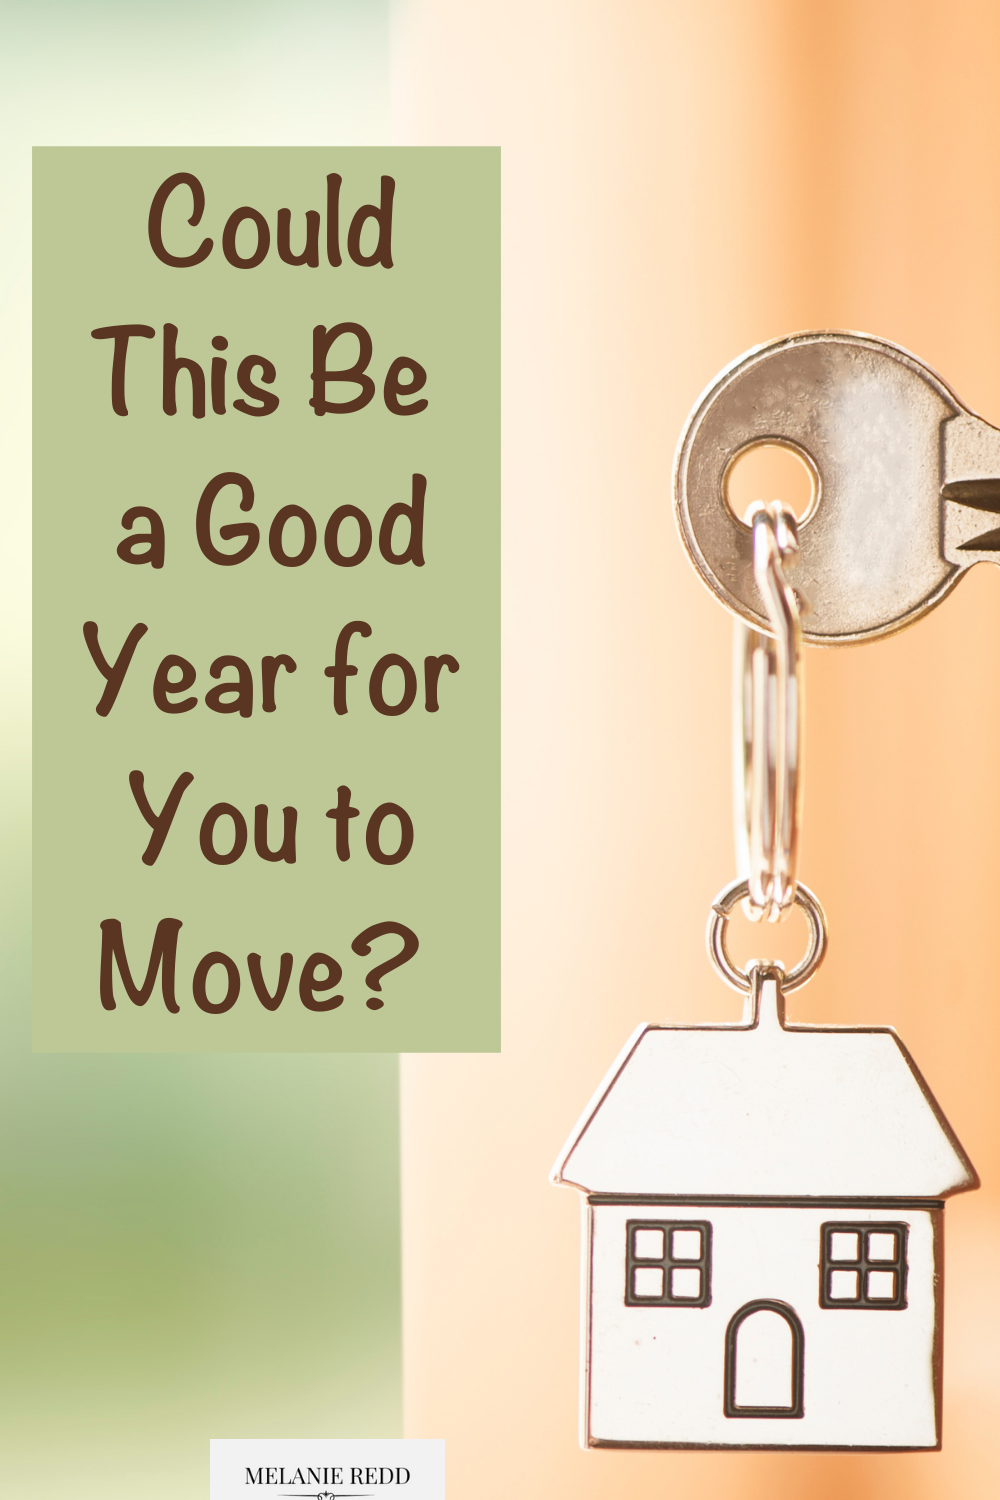 Take a look at how you can start a new chapter in 2021. Could This Year be a Good Year for You to Move? Maybe find a new home?